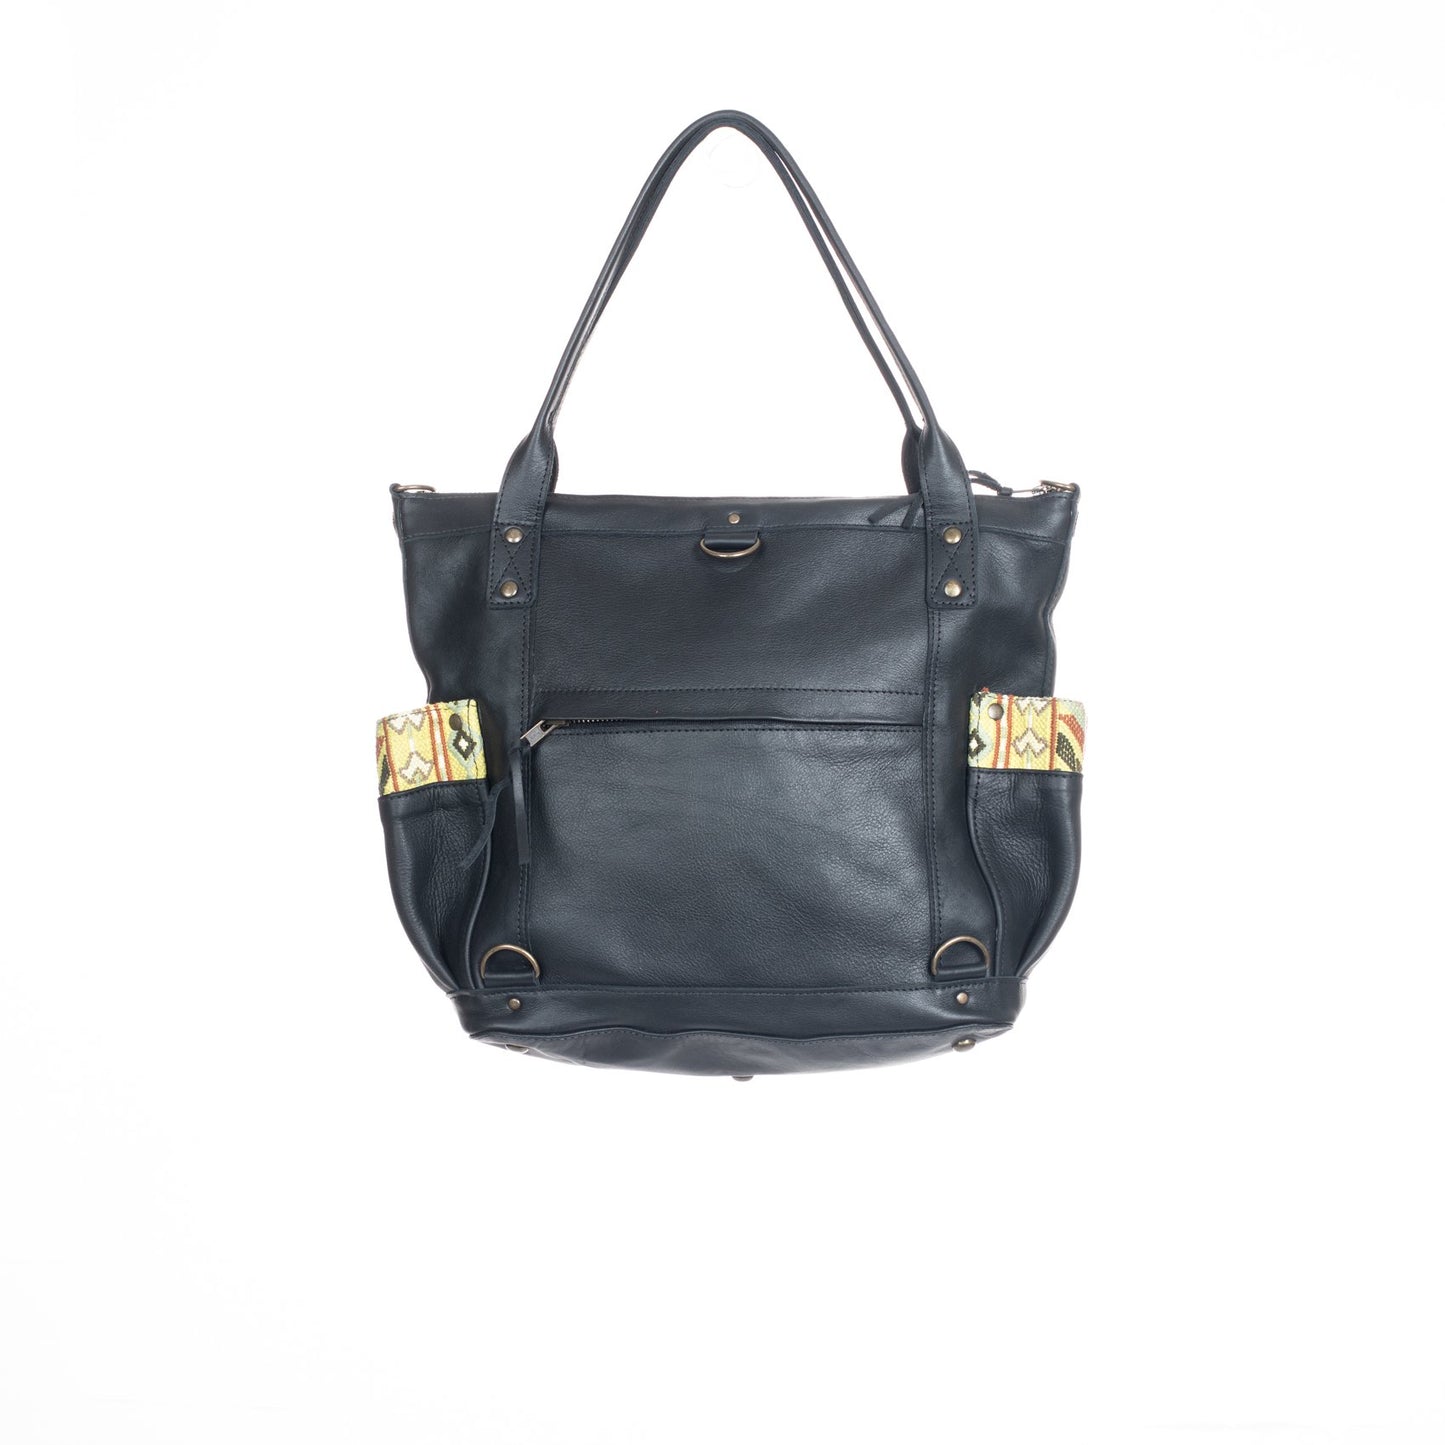 HERITAGE & SOCIETY THRIVE - THE PERFECT BAG MEDIUM - WHEAT PANEL IN CHARTREUSE + POCKET TRIM - BLACK LEATHER